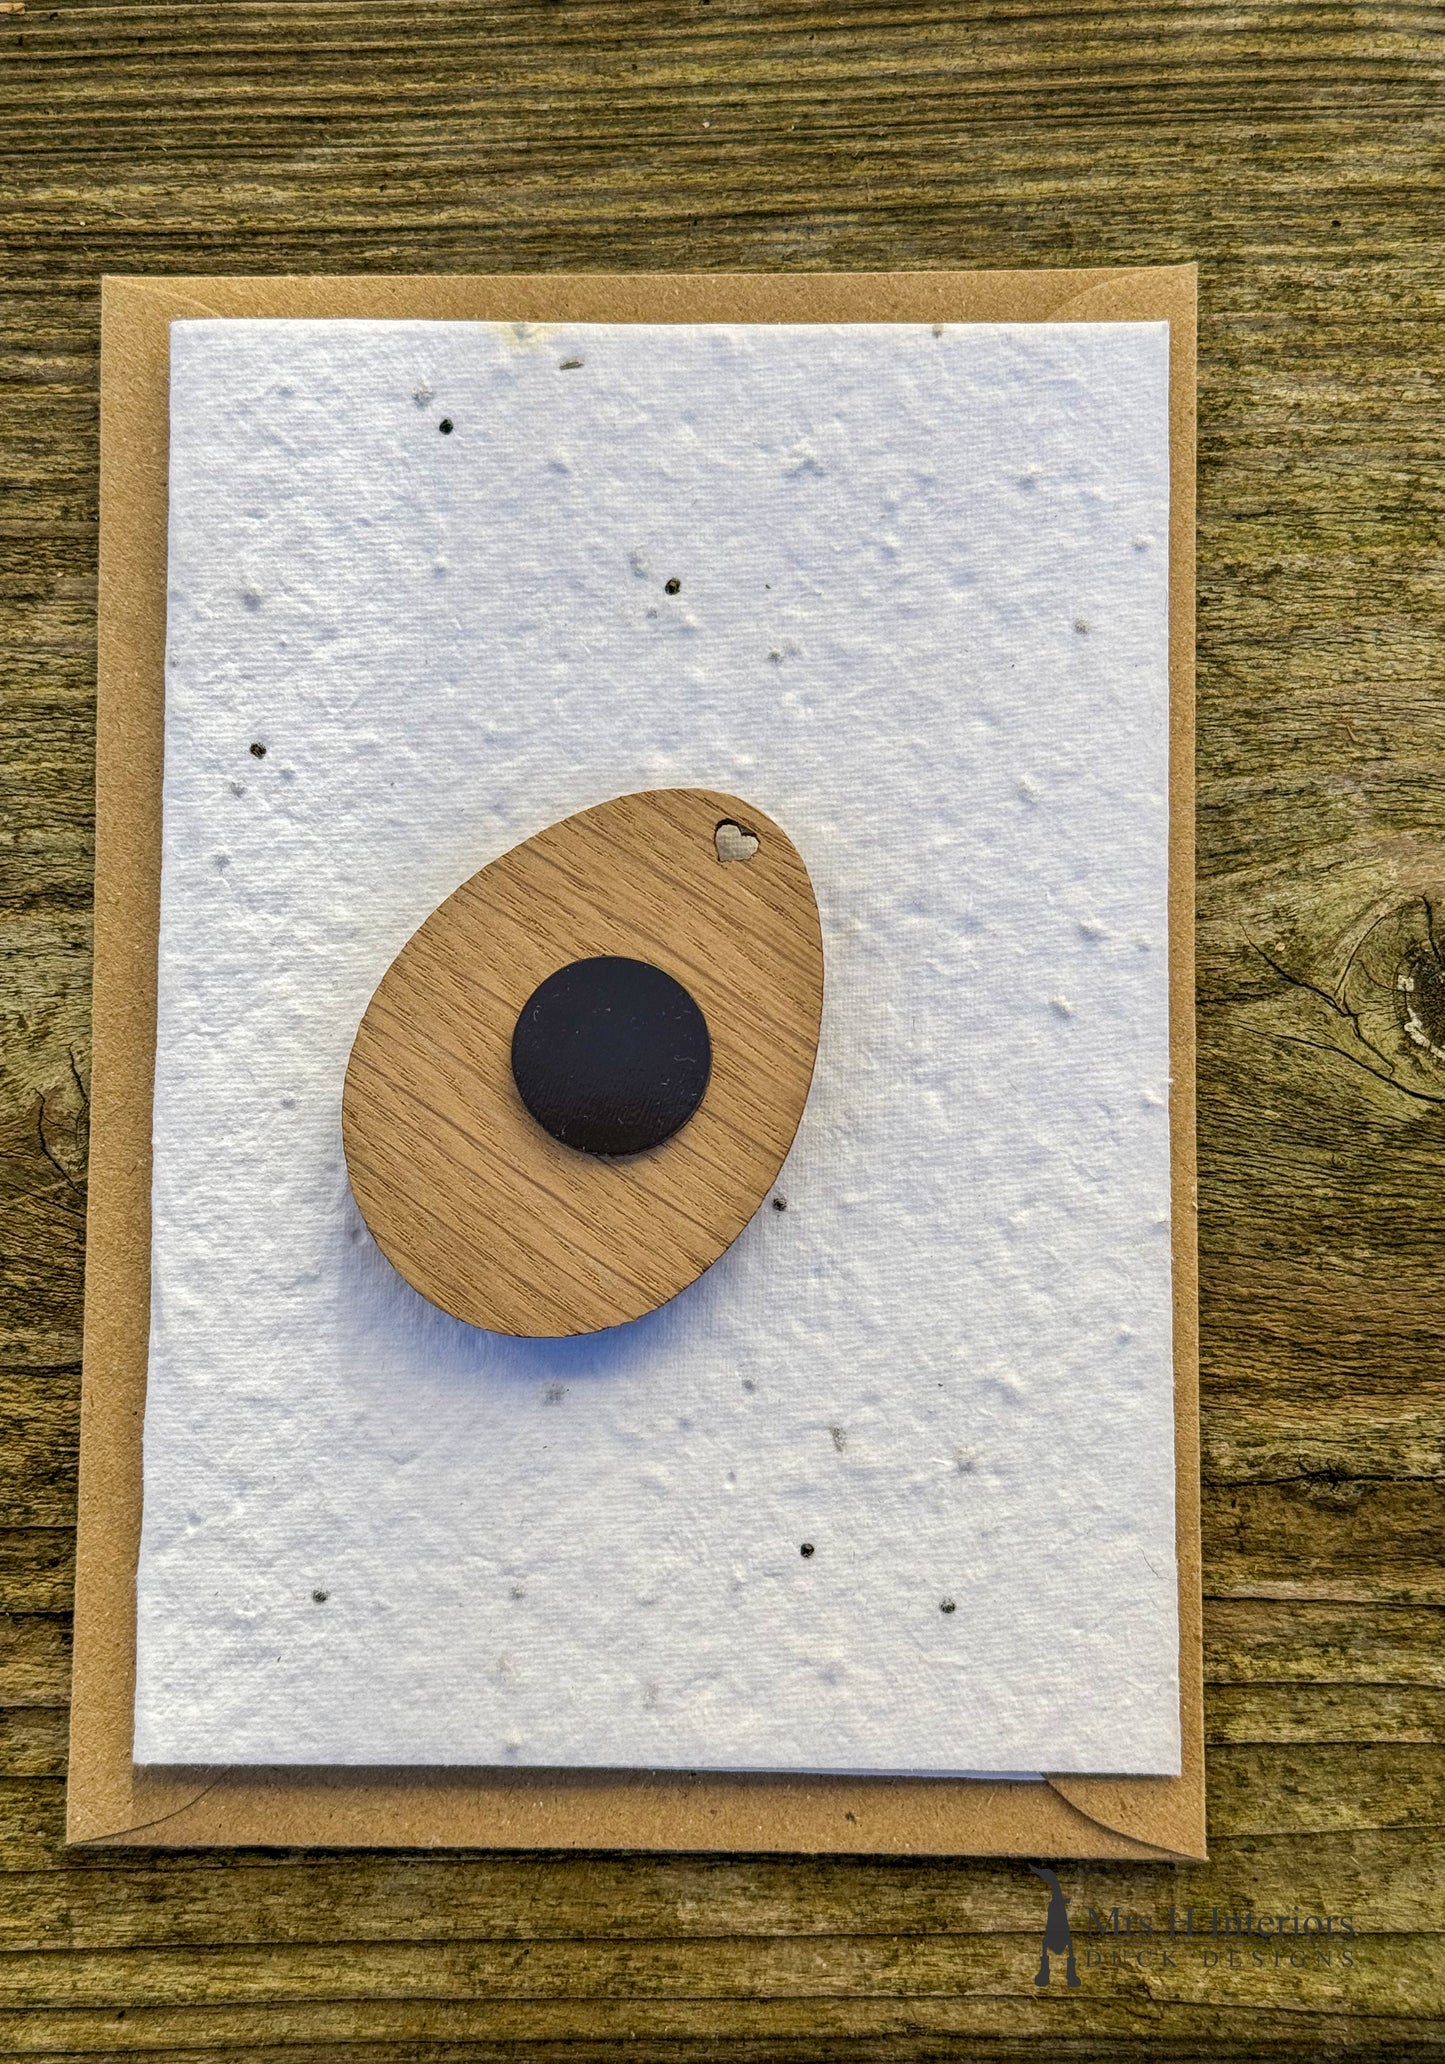 Ducking love you wooden key ring, wild flower seed paper gift card.